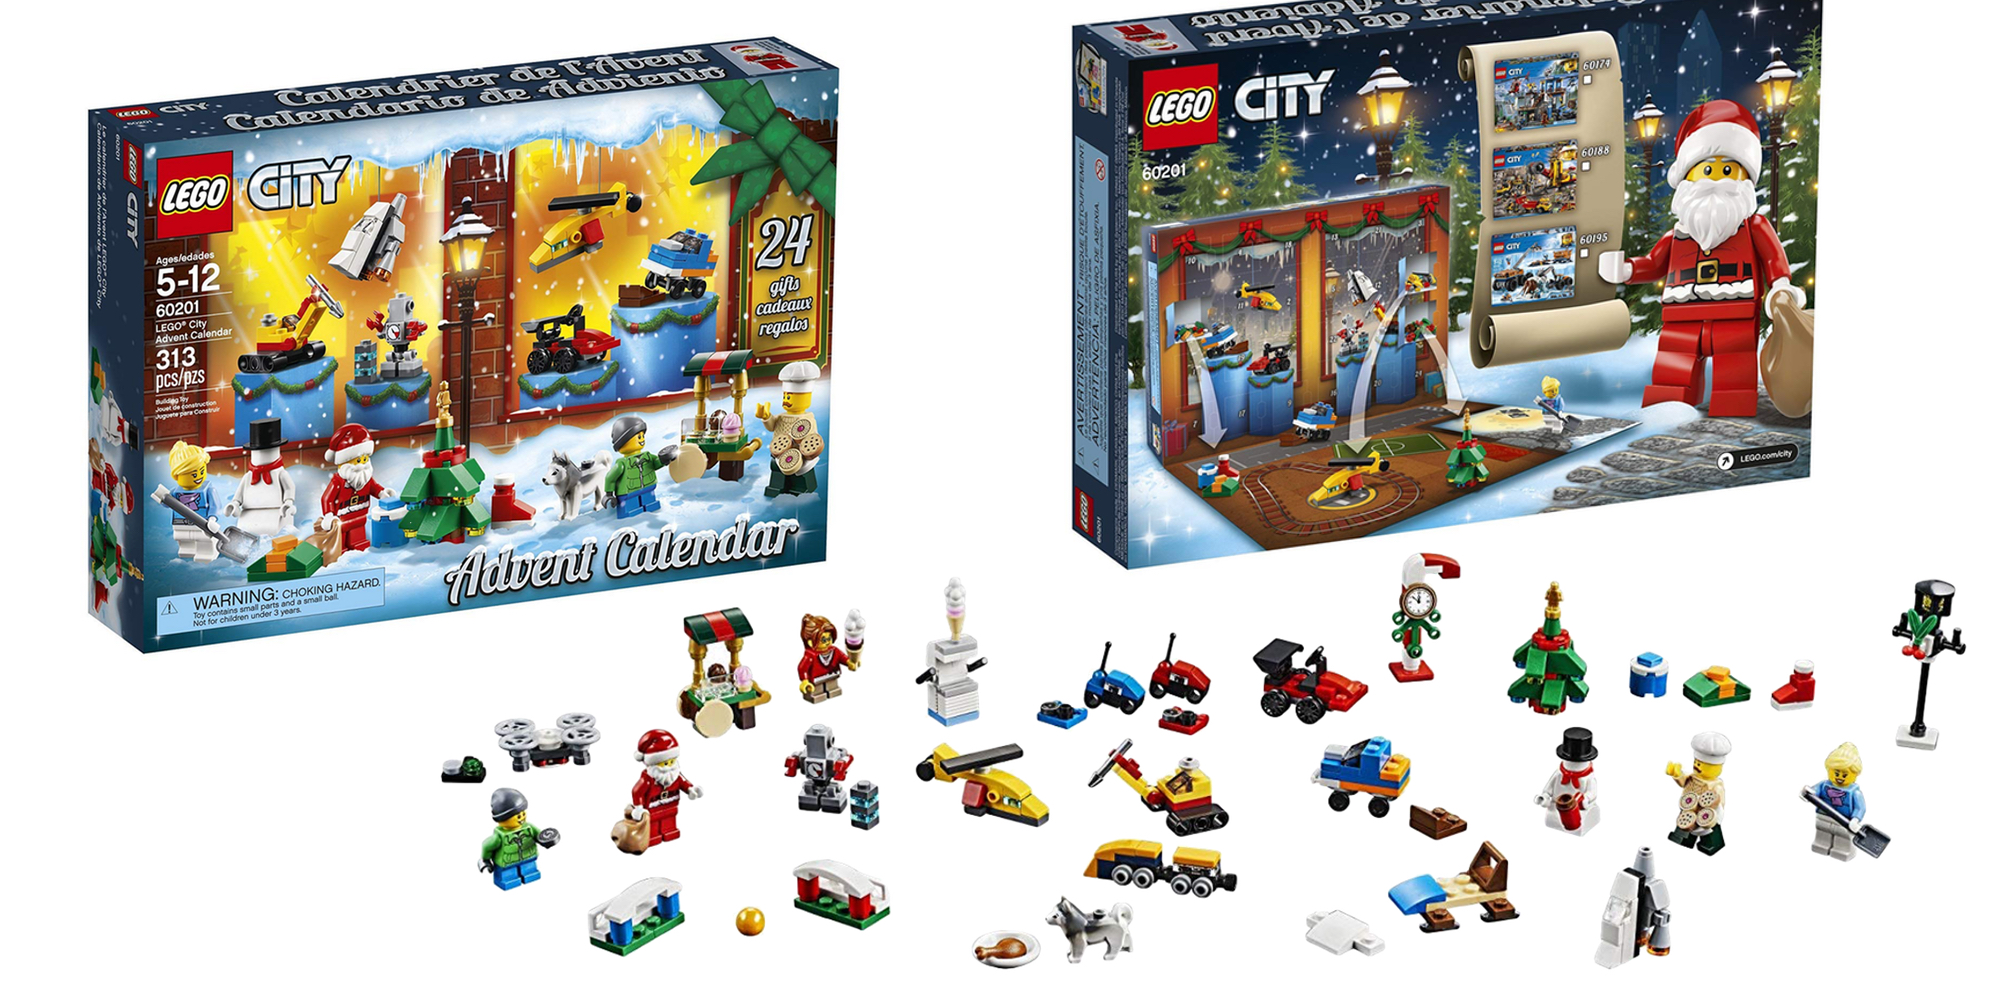 LEGO's 2018 advent calendars are finally available, here's what you'll